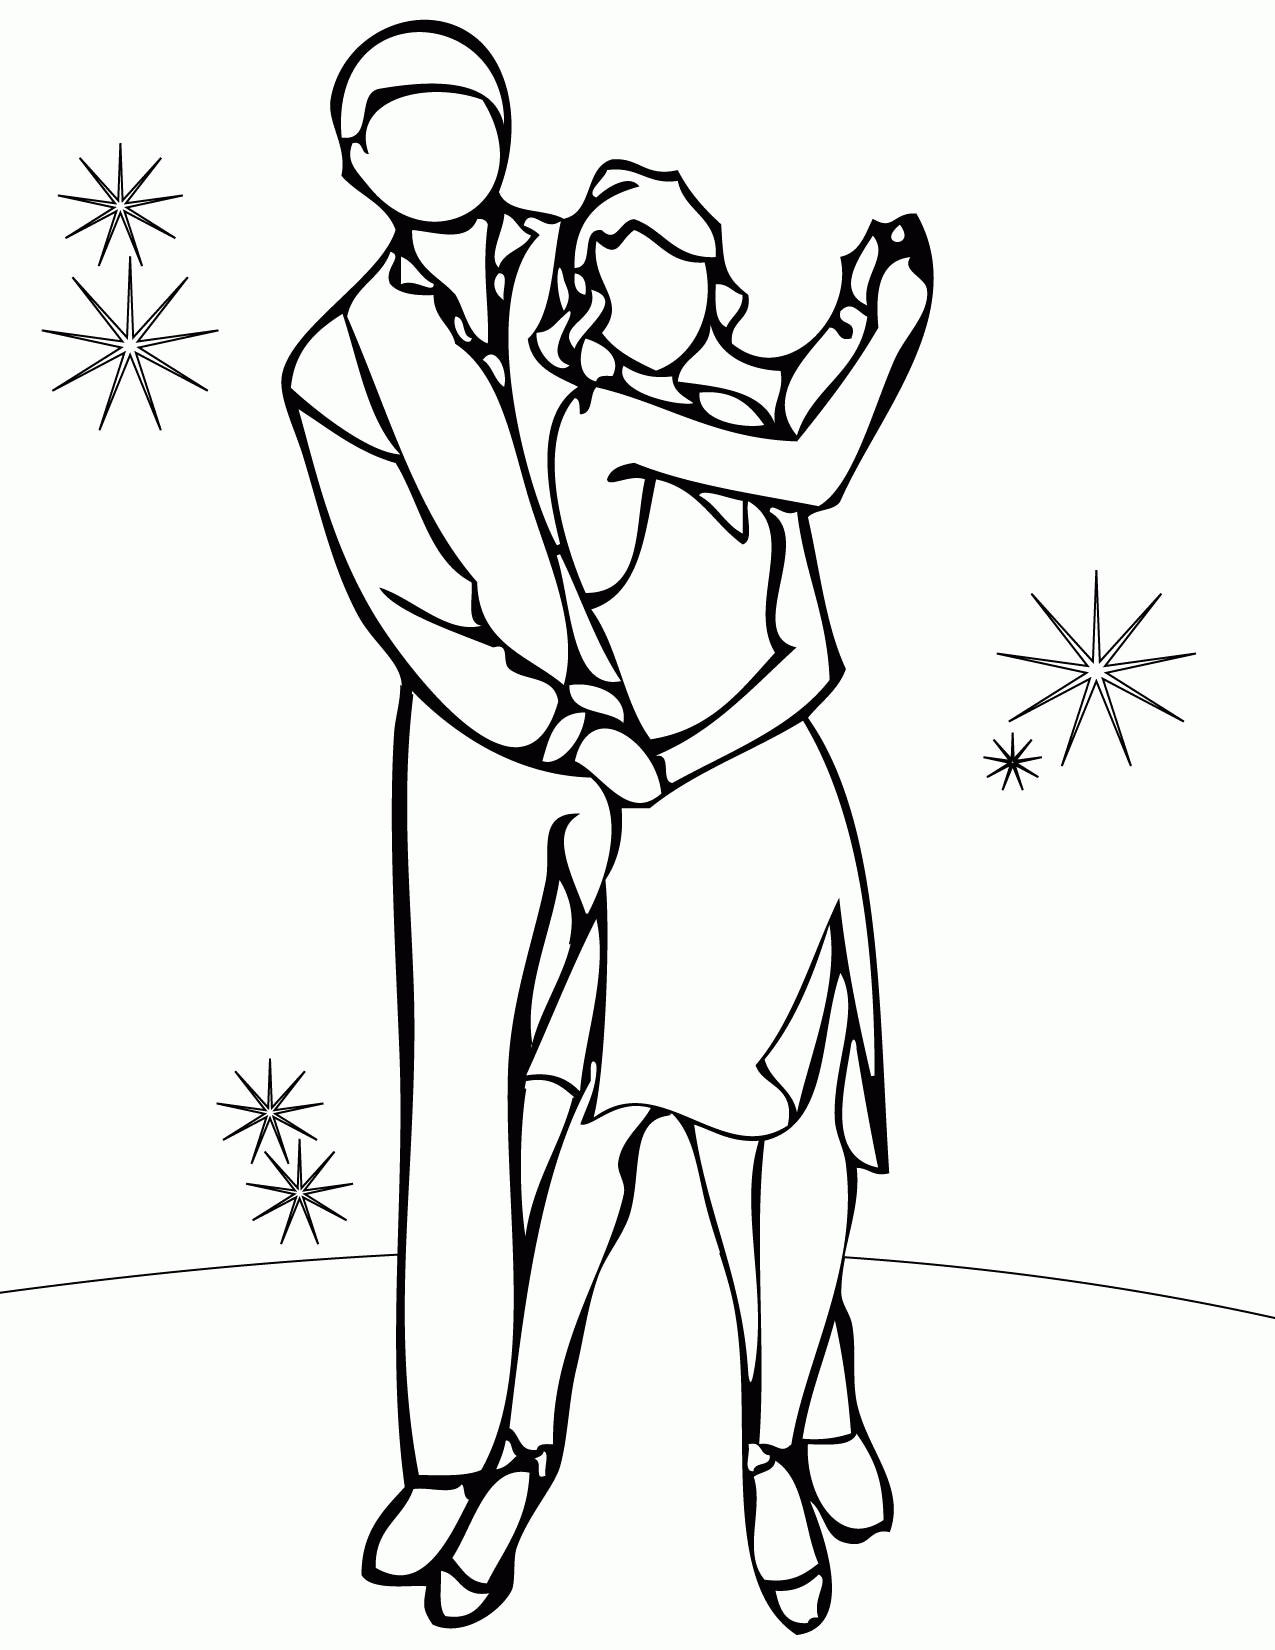 Salsa Coloring Page - Handipoints